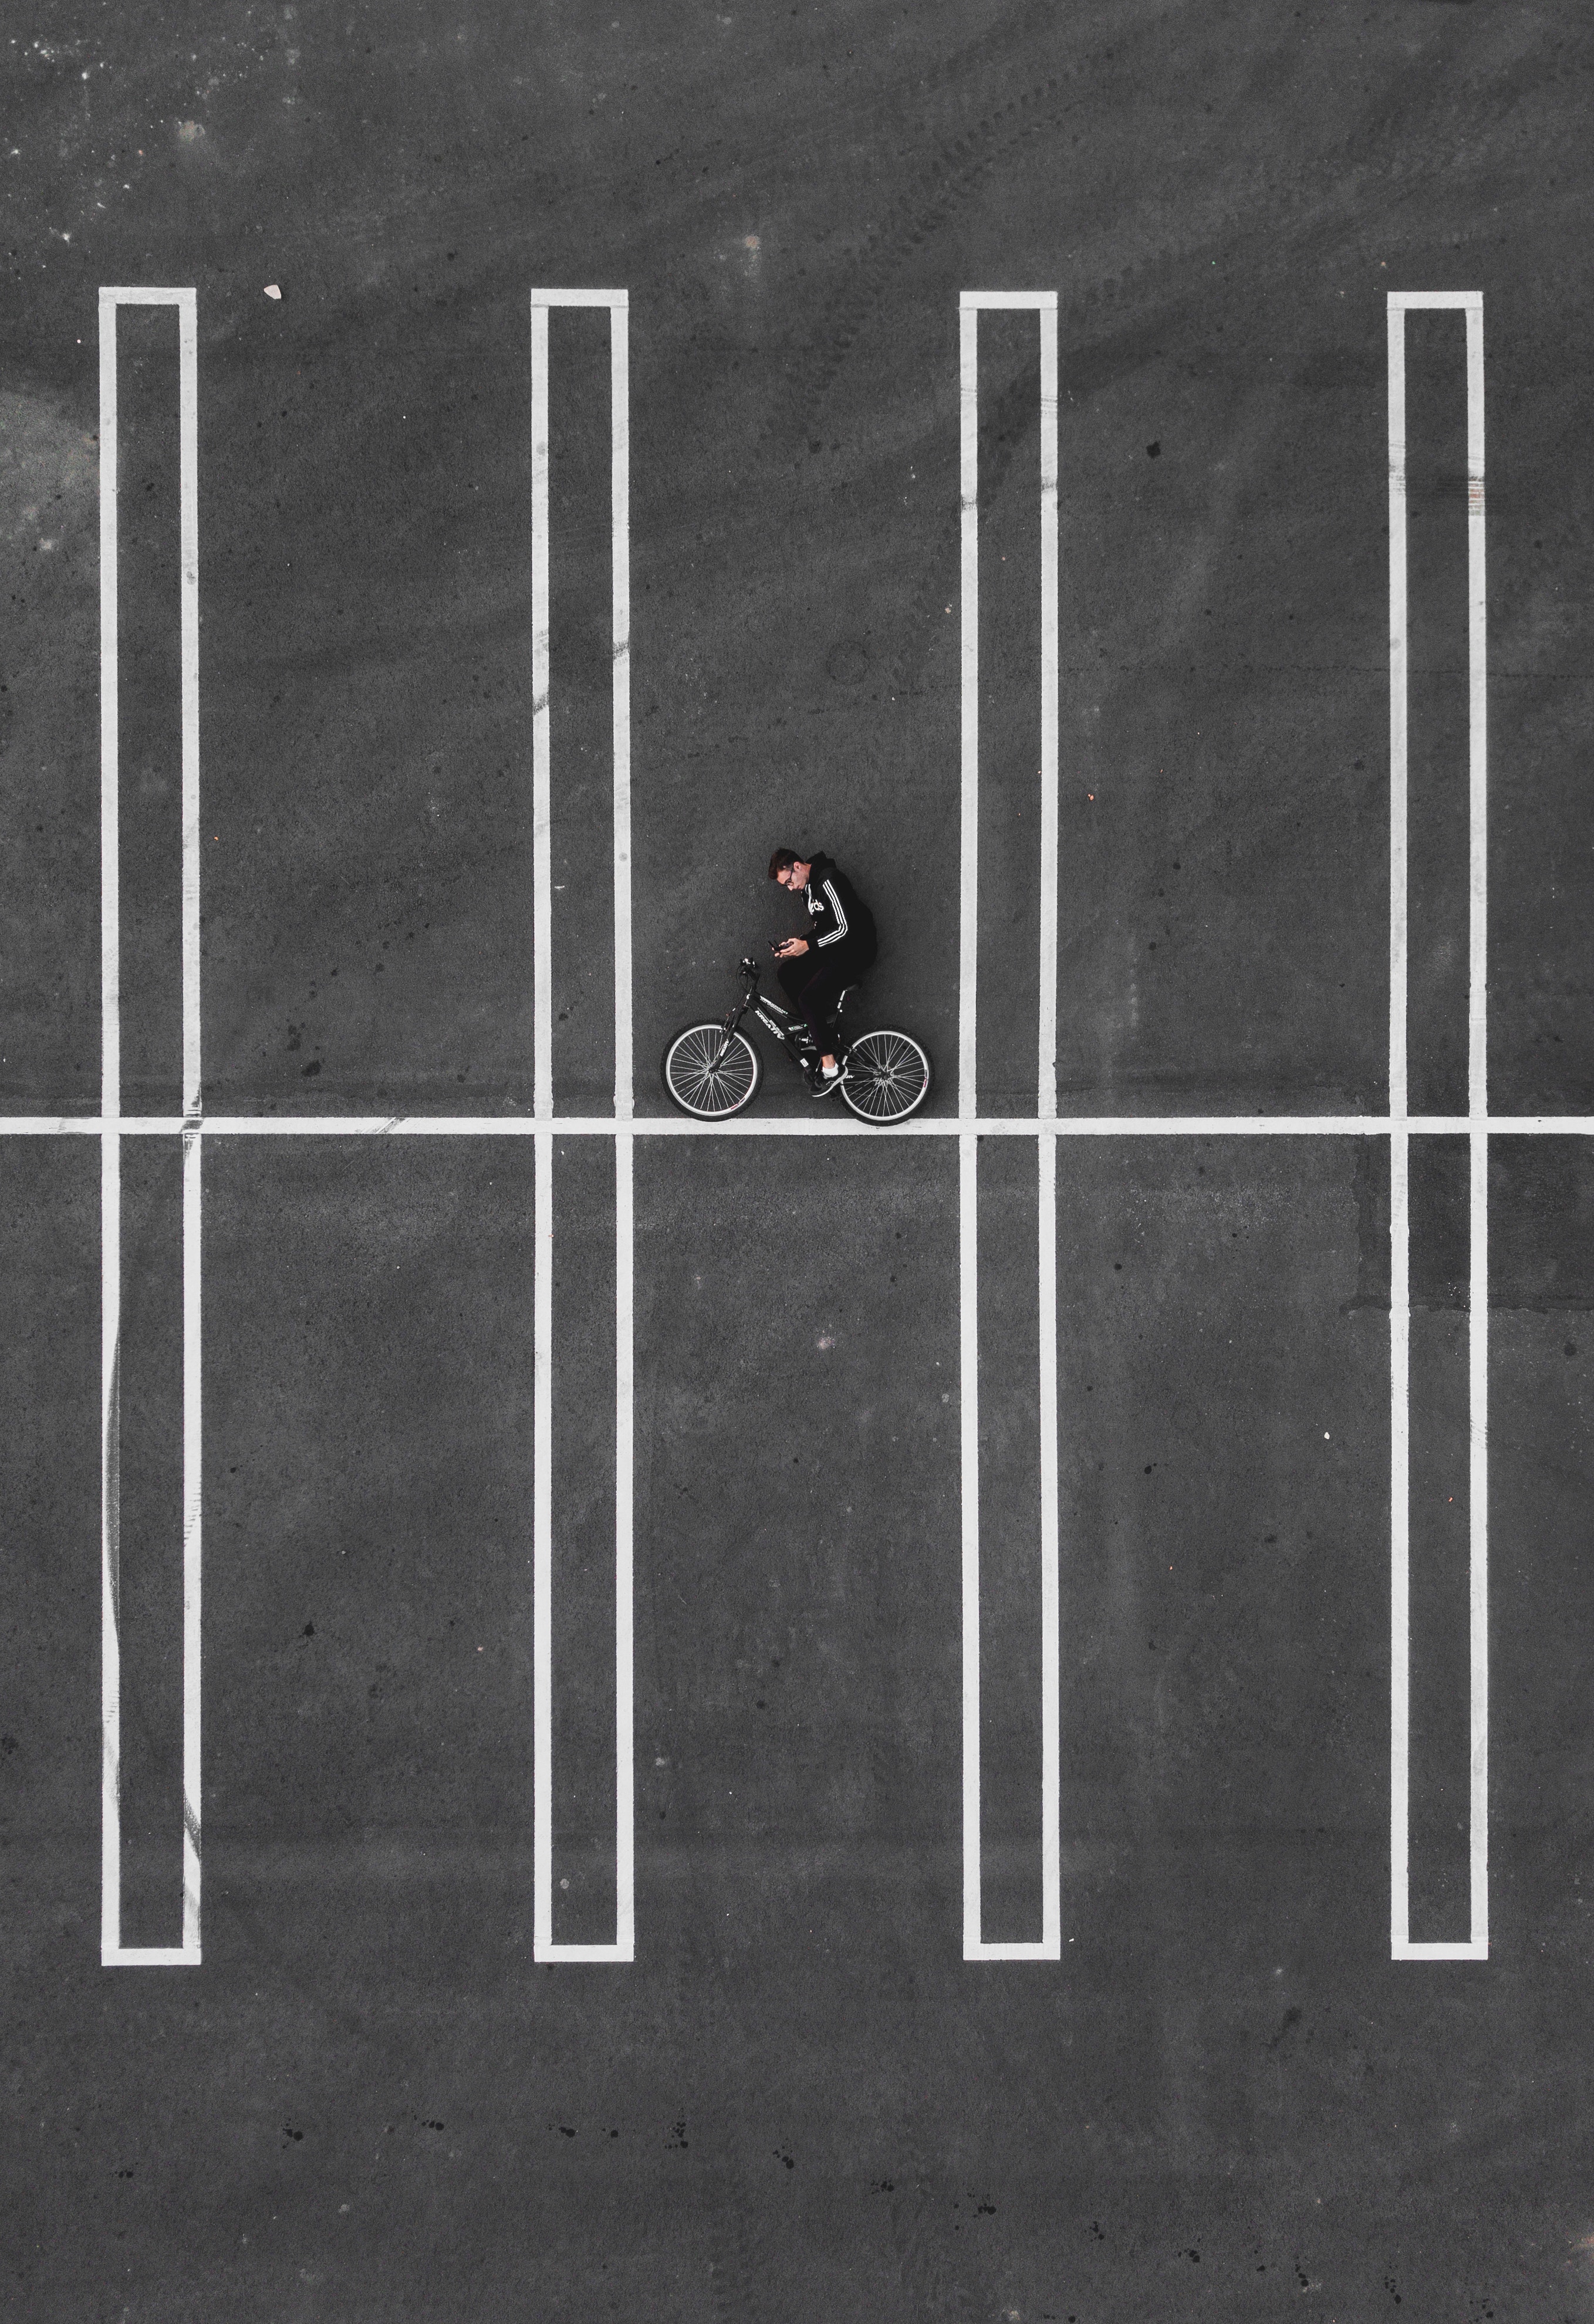 Popular Cyclist 4K for smartphone